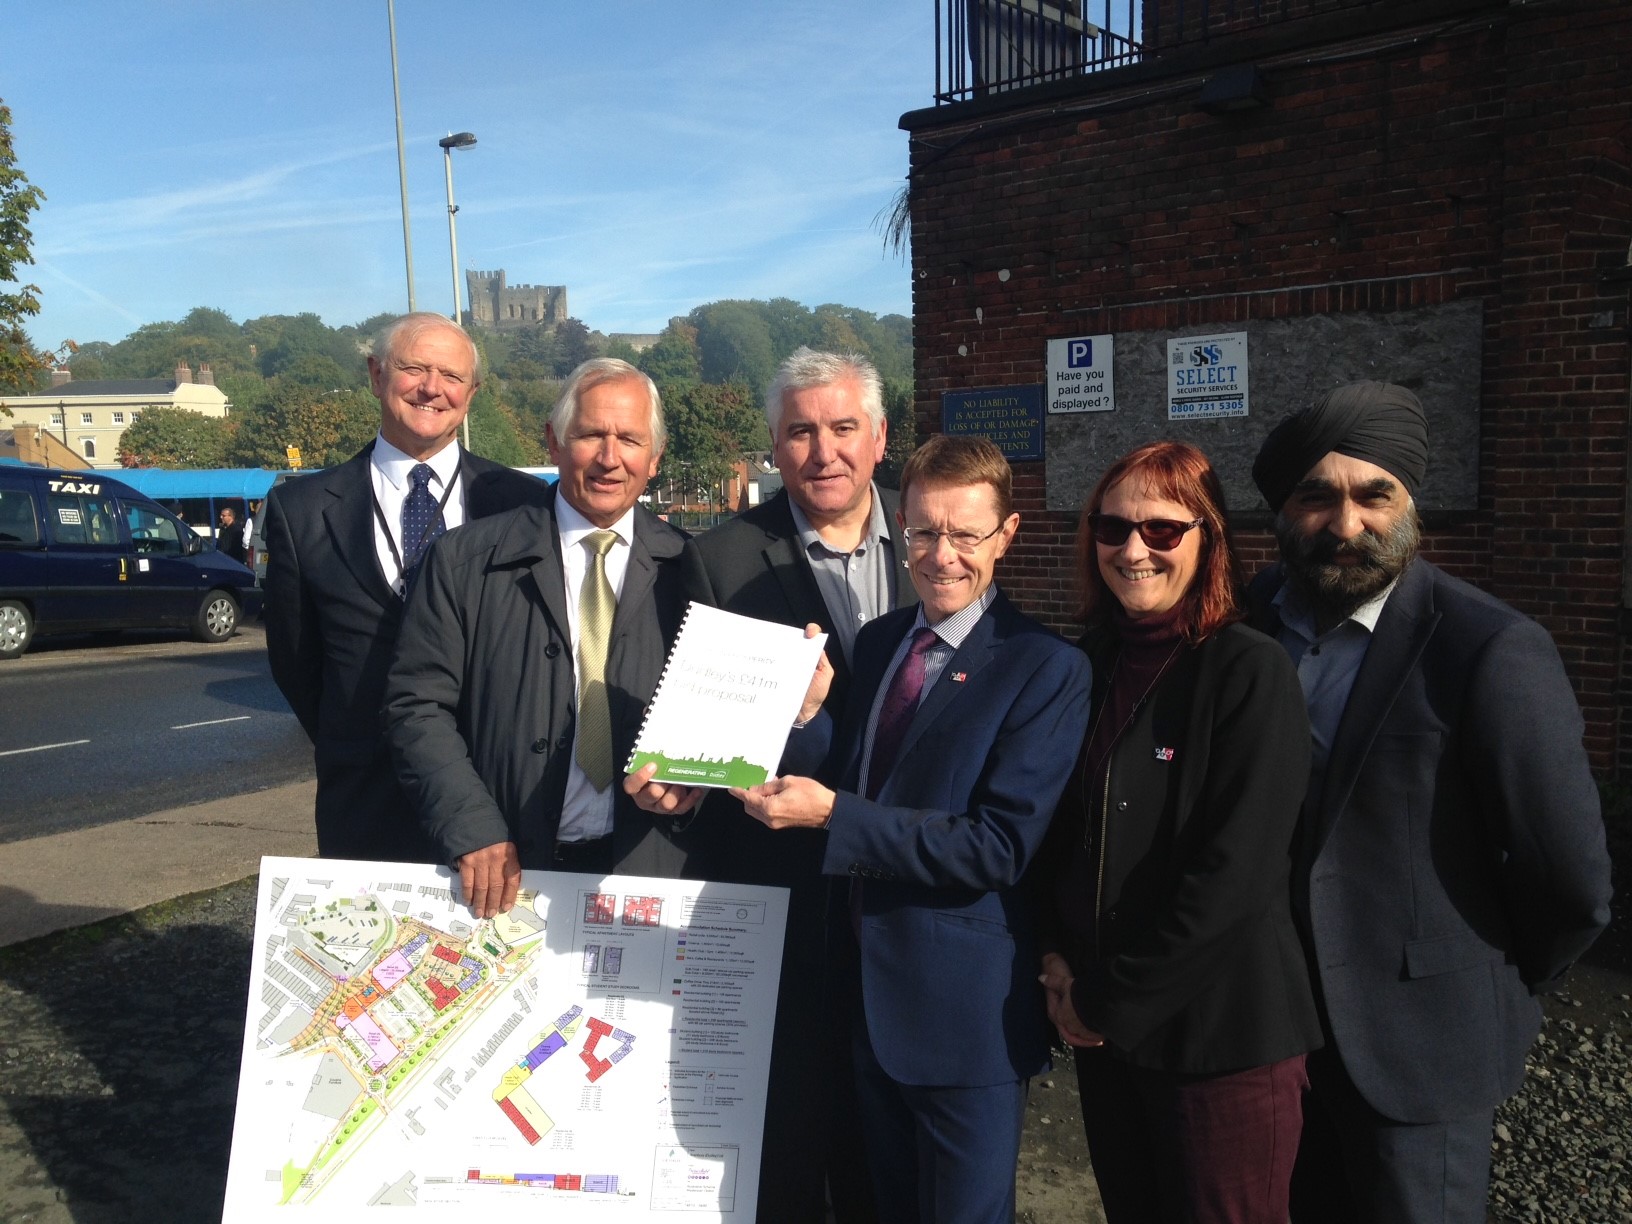 (l-r) Cllr Ian Kettle, Dudley Council's cabinet member for regeneration, Jeremy Knight-Adams, director of Avenbury Properties, Cllr Patrick Harley, leader of Dudley Council, Andy Street, Mayor of the West Midlands, Sarah Norman, chief executive of Dudley Council and Ninder Johal from the Black Country Local Enterprise Partnership